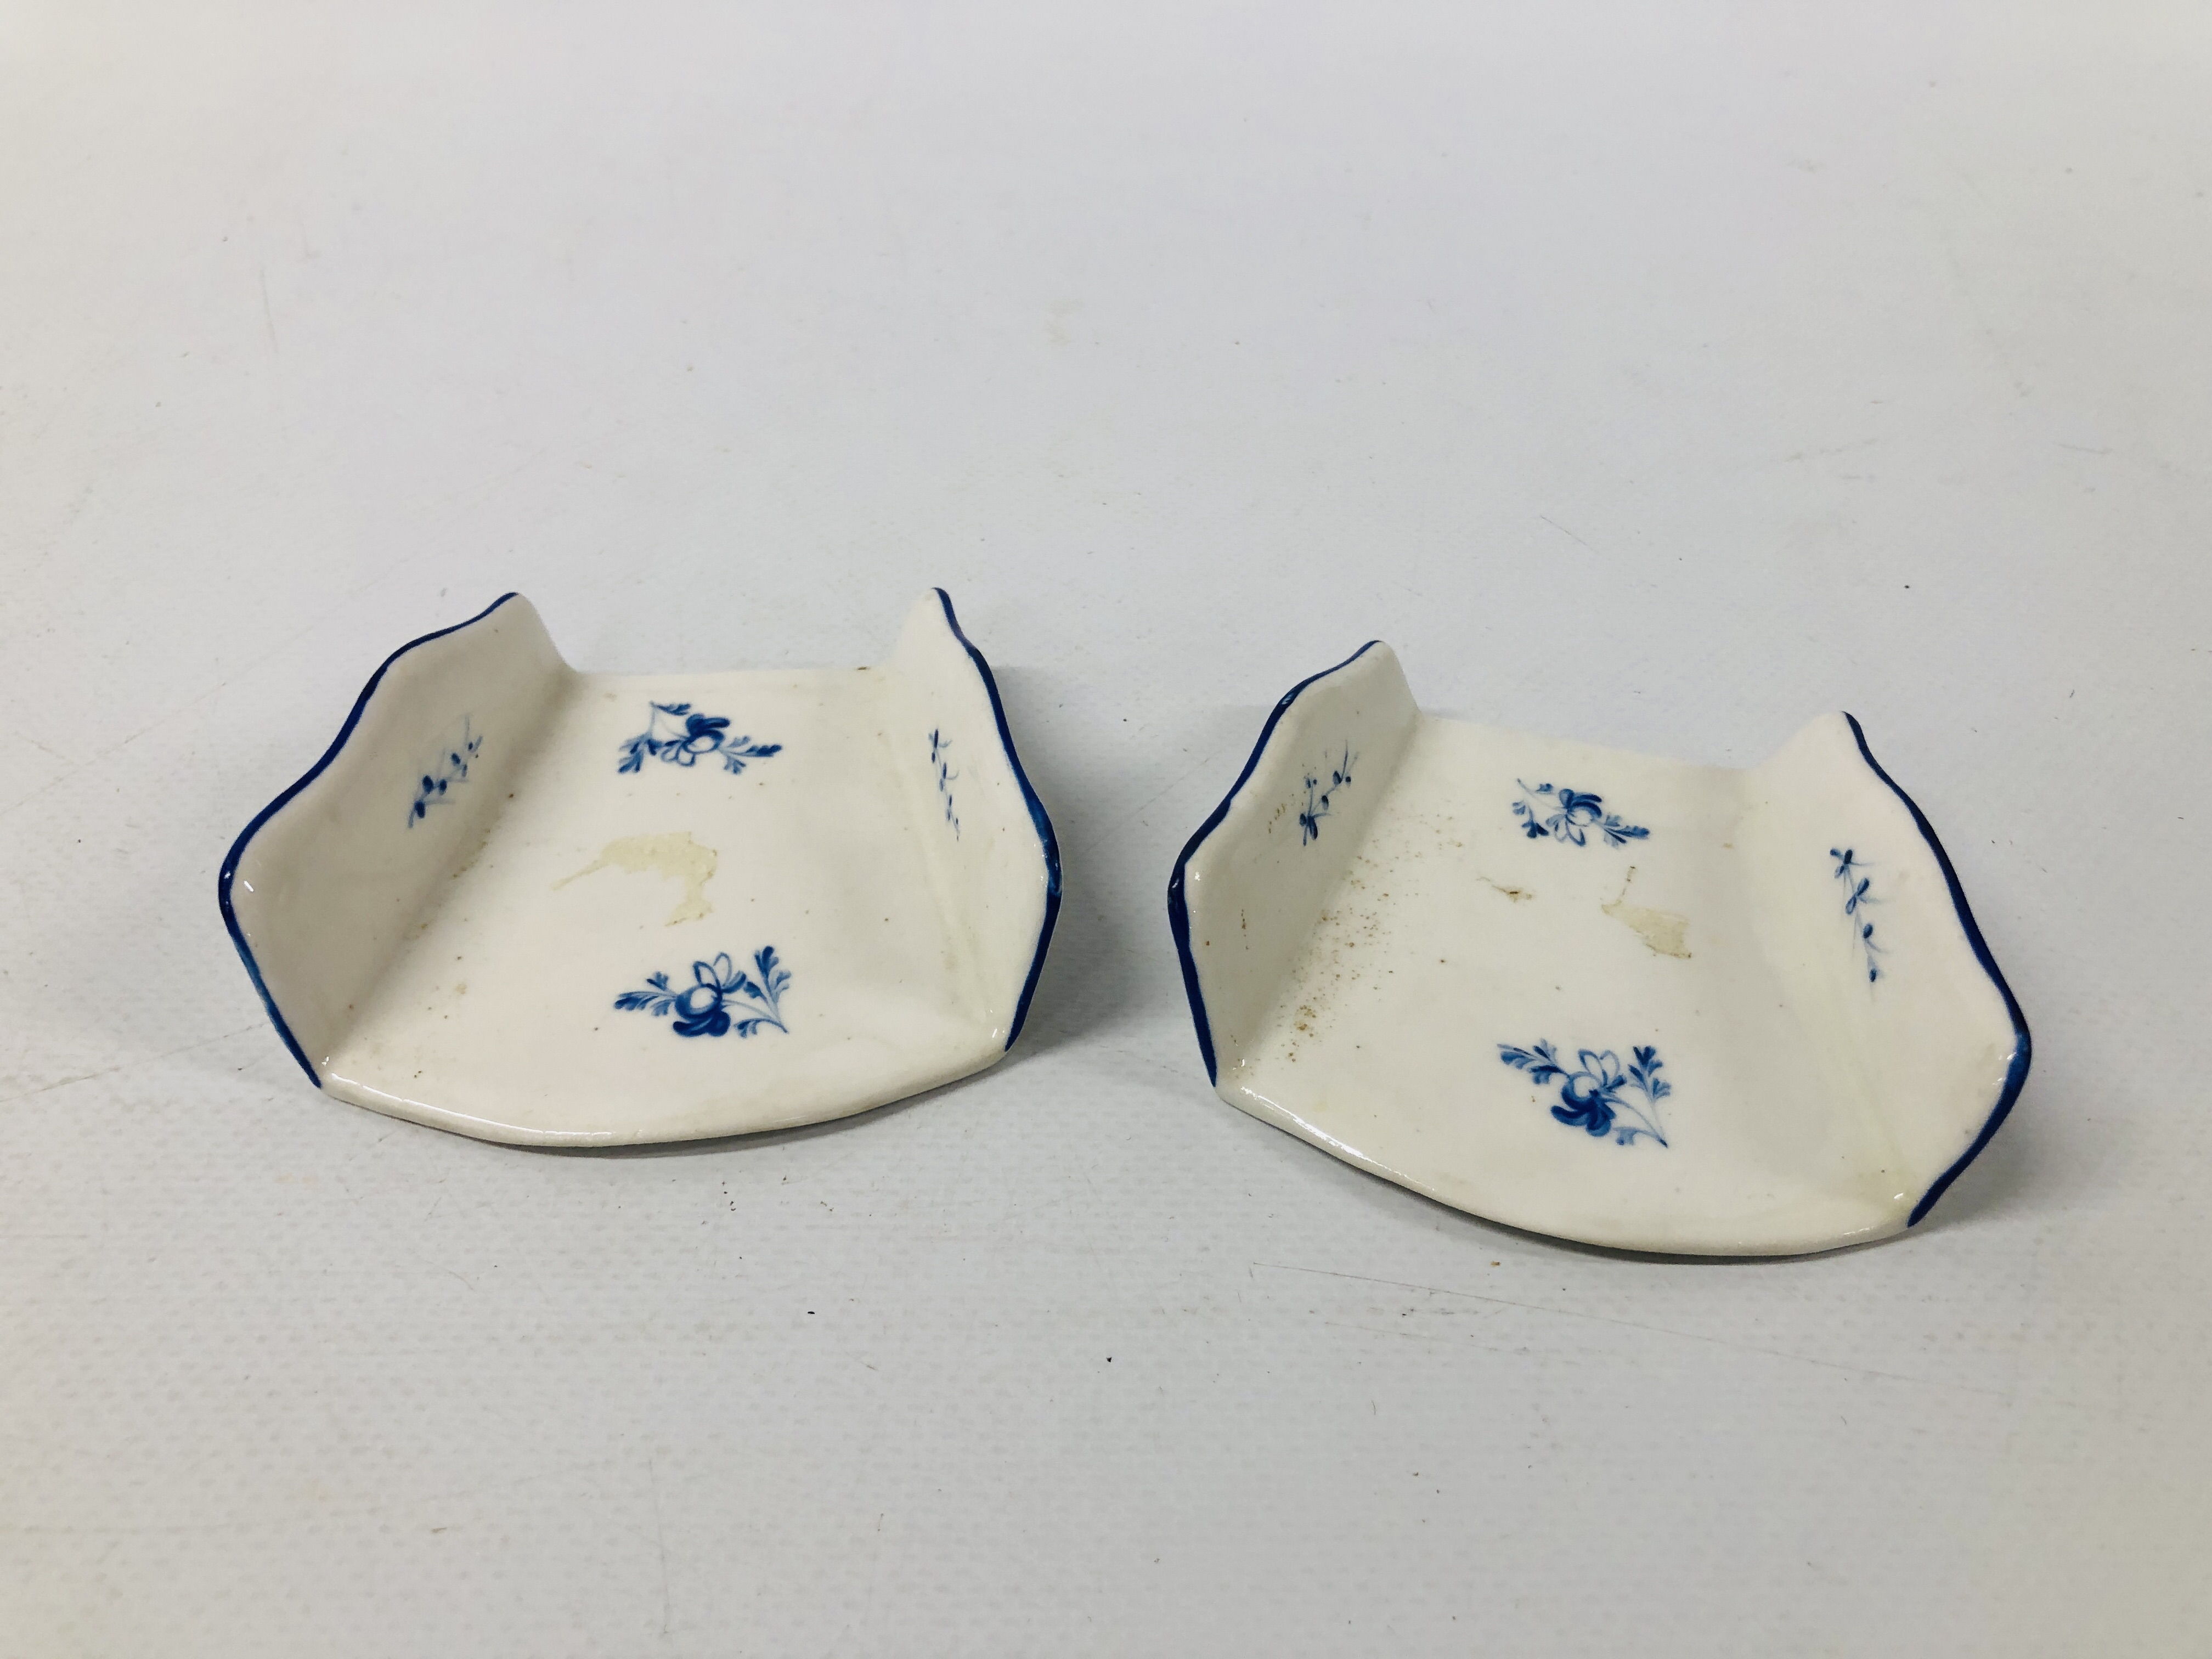 TWO DERBY ASPARAGUS SERVERS, OF FAN SHAPE, DECORATED IN DRY BLUE WITH SCATTERED SPRIGS, c.1780, 7.